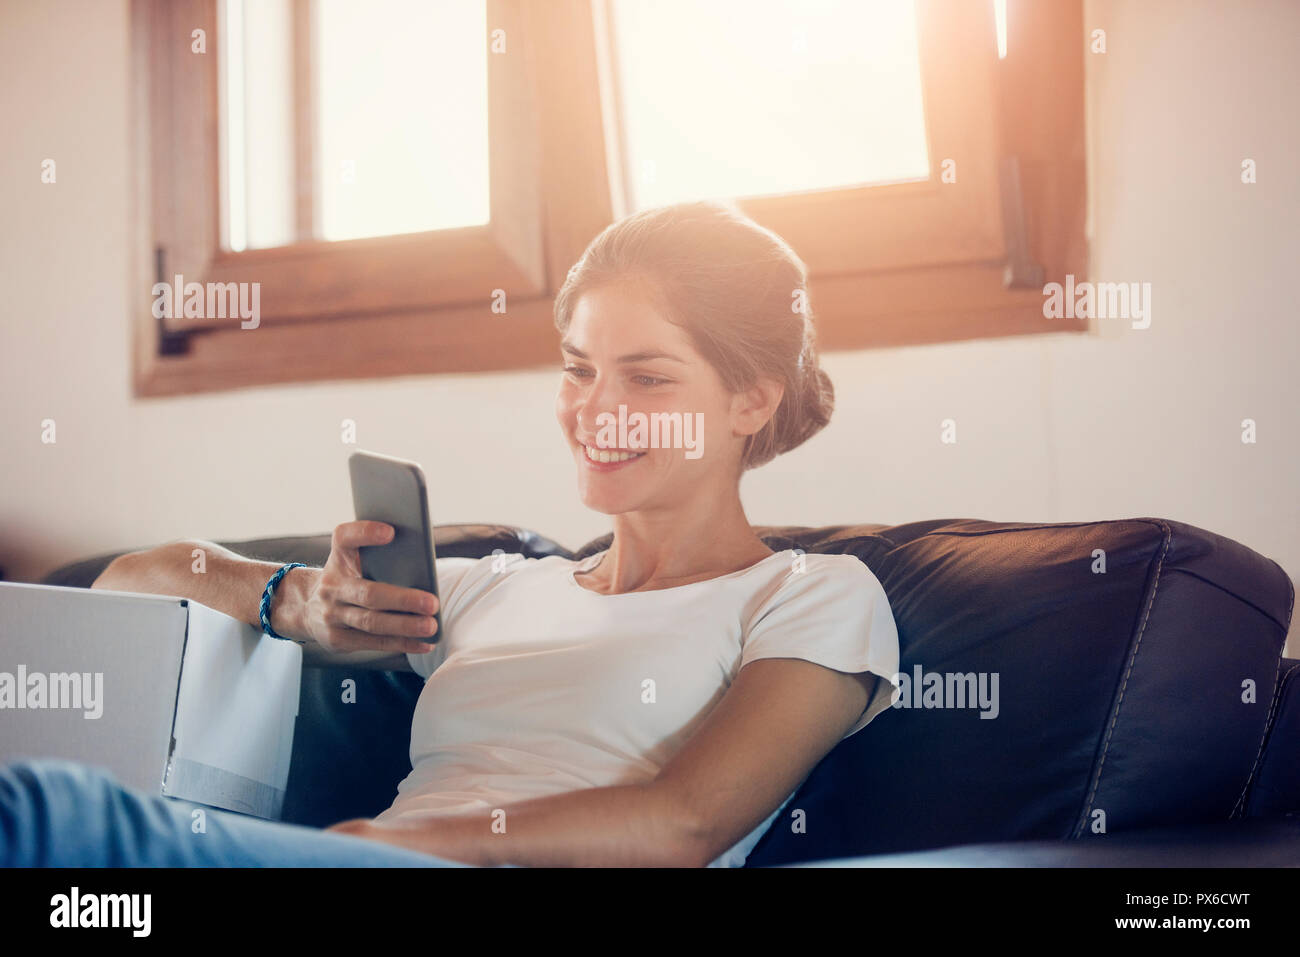 a beautiful young woman is communicating through her smart phone, next to a cardboard box. Calling for the mail delivery service. Stock Photo